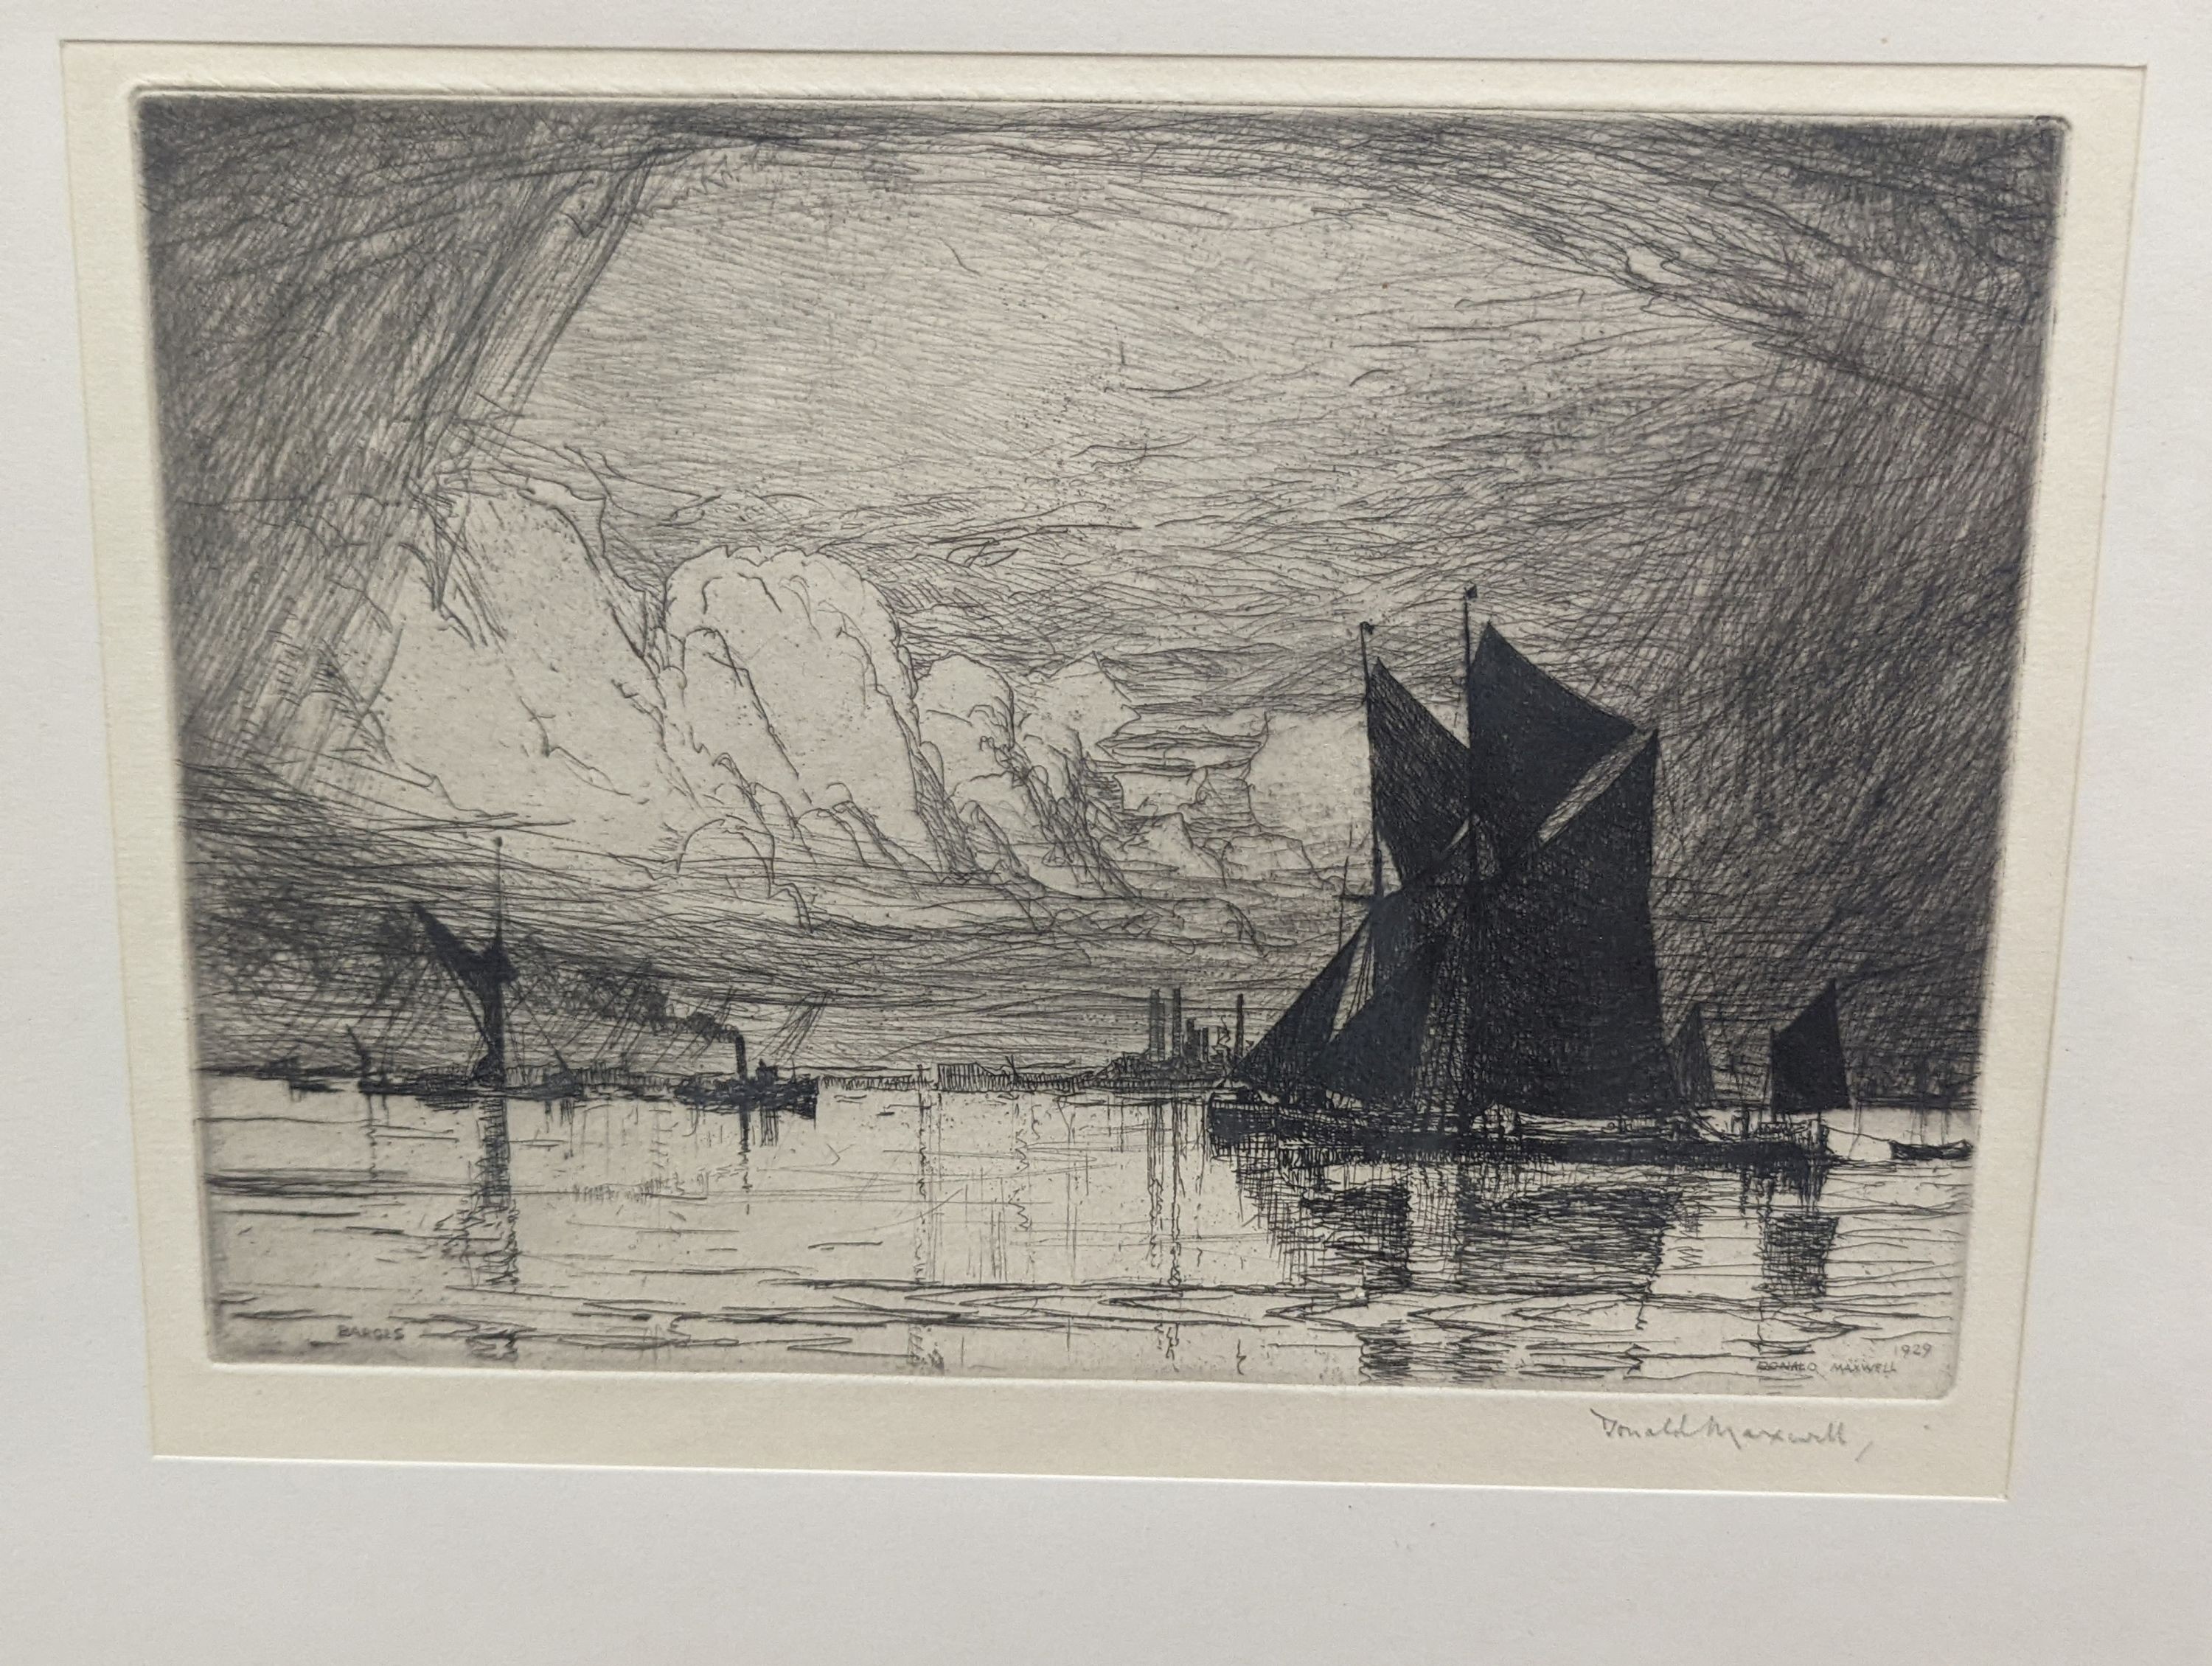 Donald Maxwell (1877-1936), etching, Sail barges off the coast, signed in pencil, 15 x 21cm and a etching and aquatint, Pooks Hill, 20 x 30cm